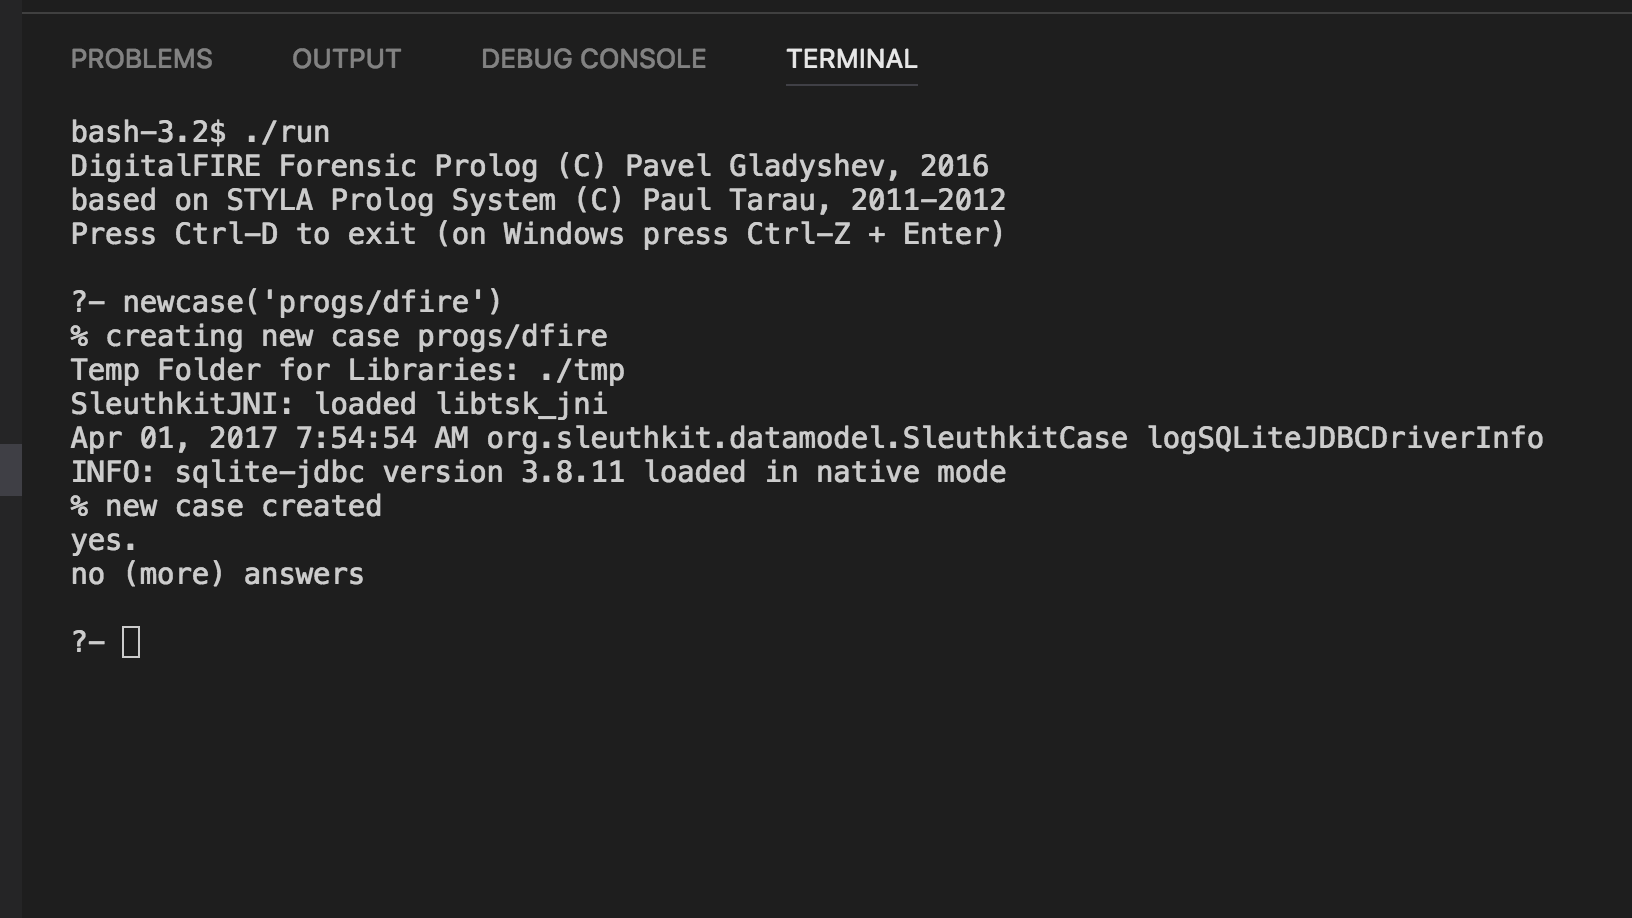 DFIRE Forensic Prolog